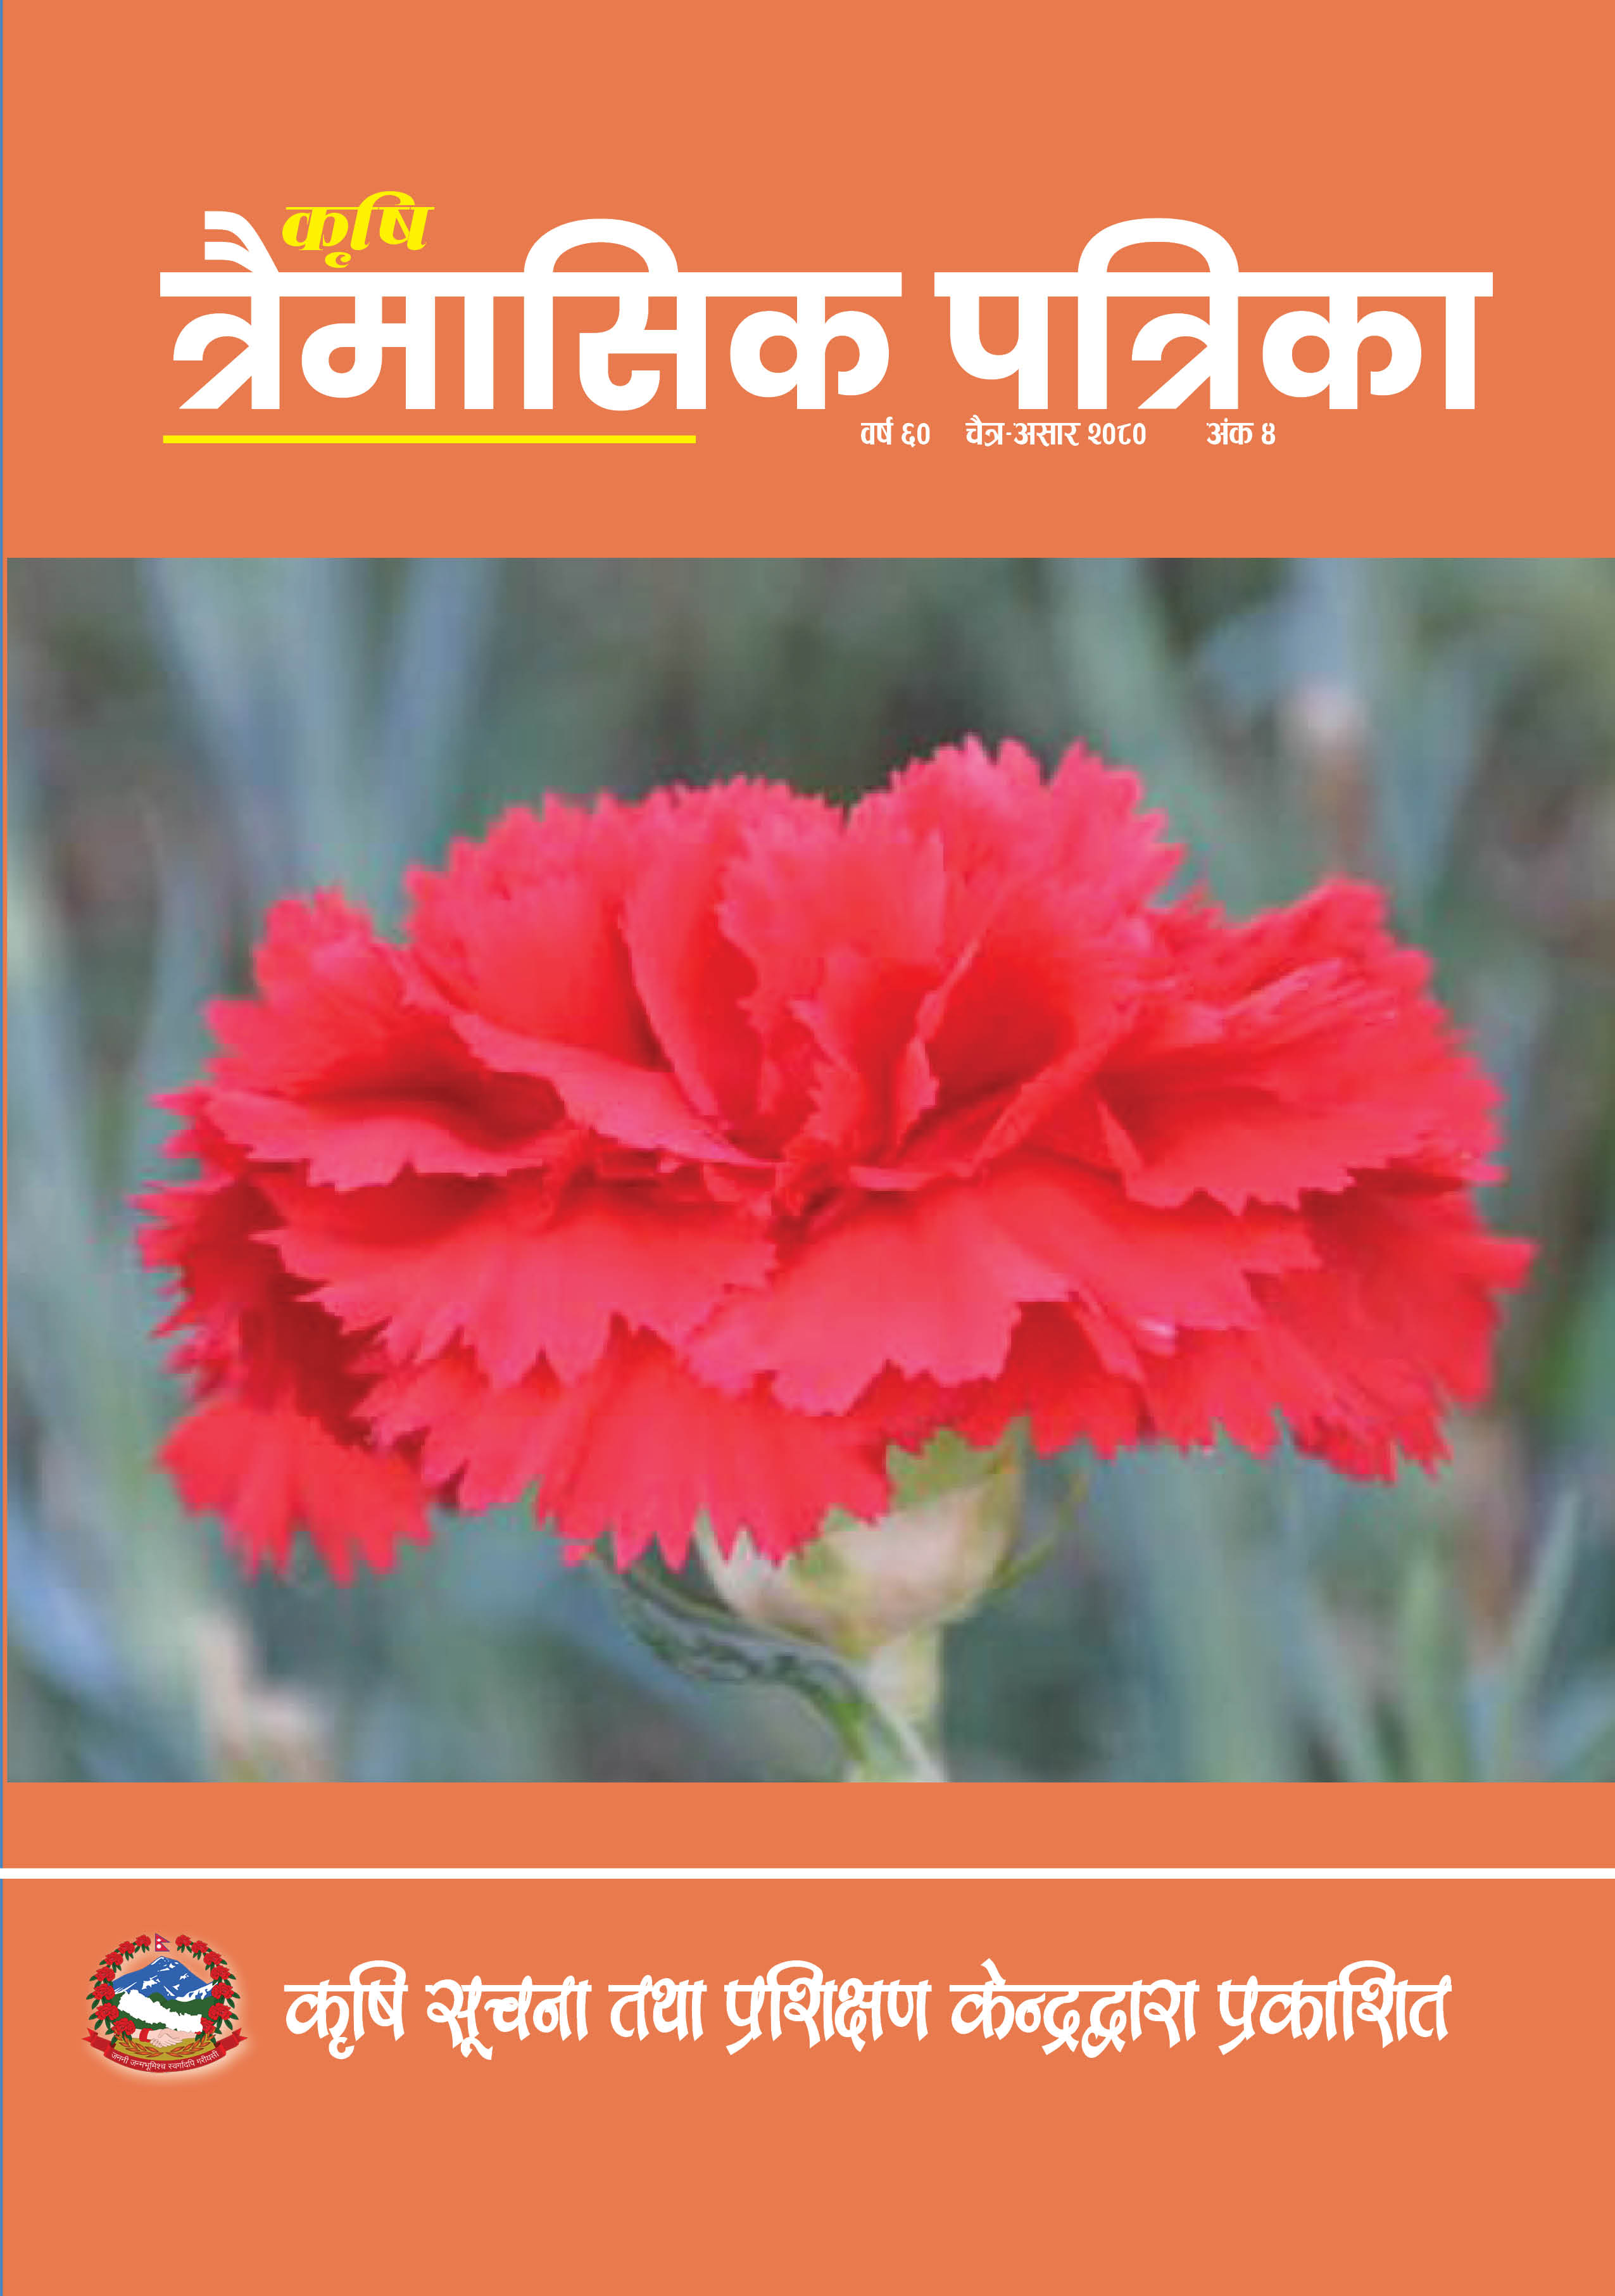 Cover image of Agricultural Quarterly, 2080 (Apr.-Jun) issue 4